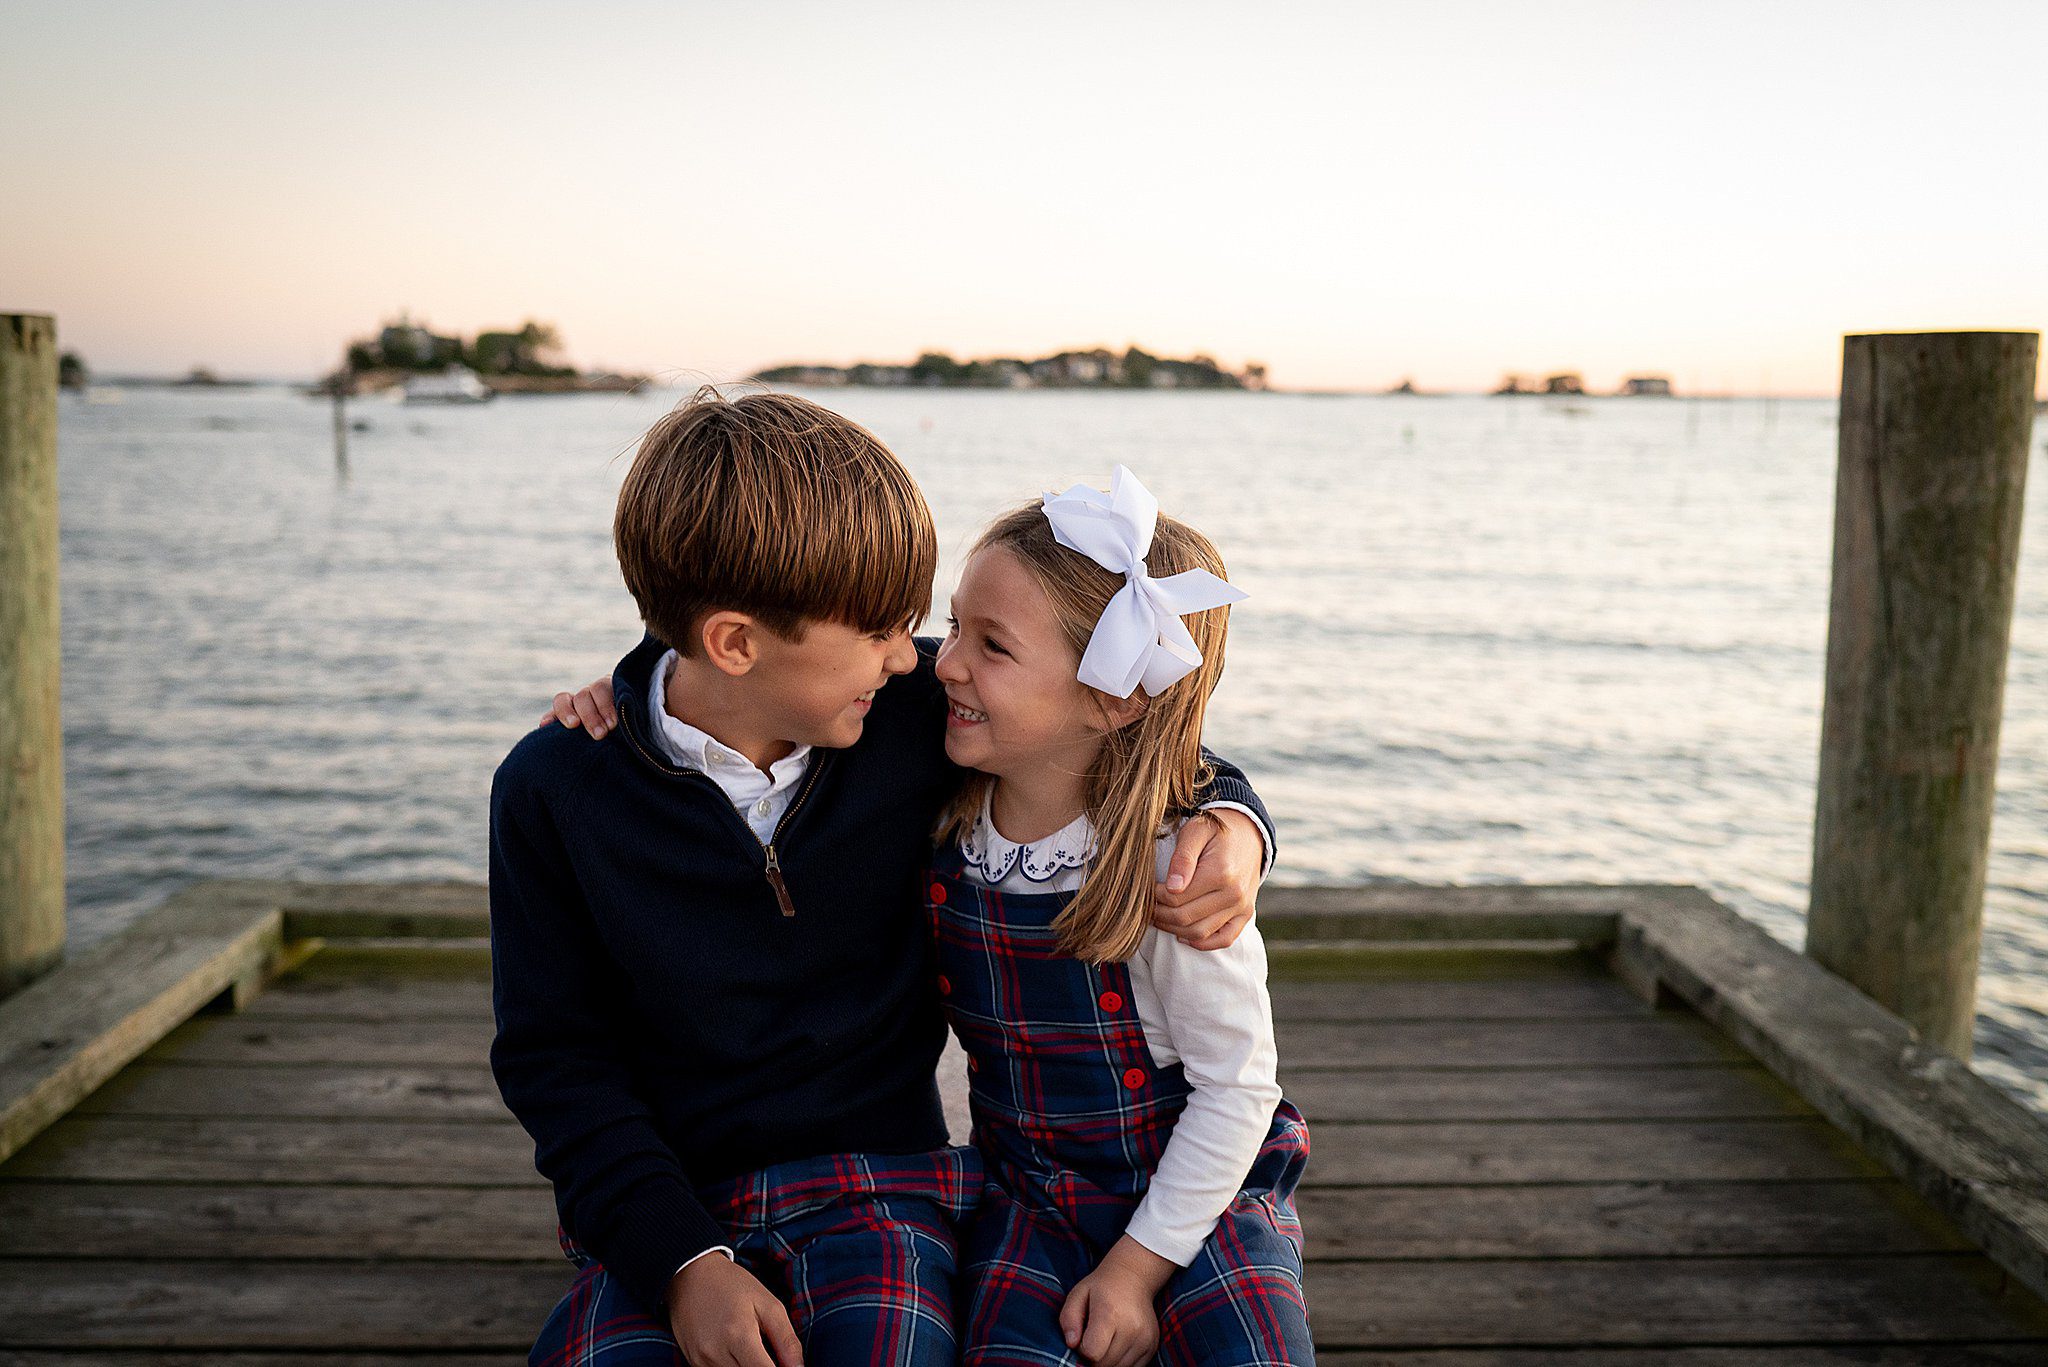 Young siblings giggle while holding each other close and sitting on a dock in matching plaid outfits after meeting babysitters connecticut